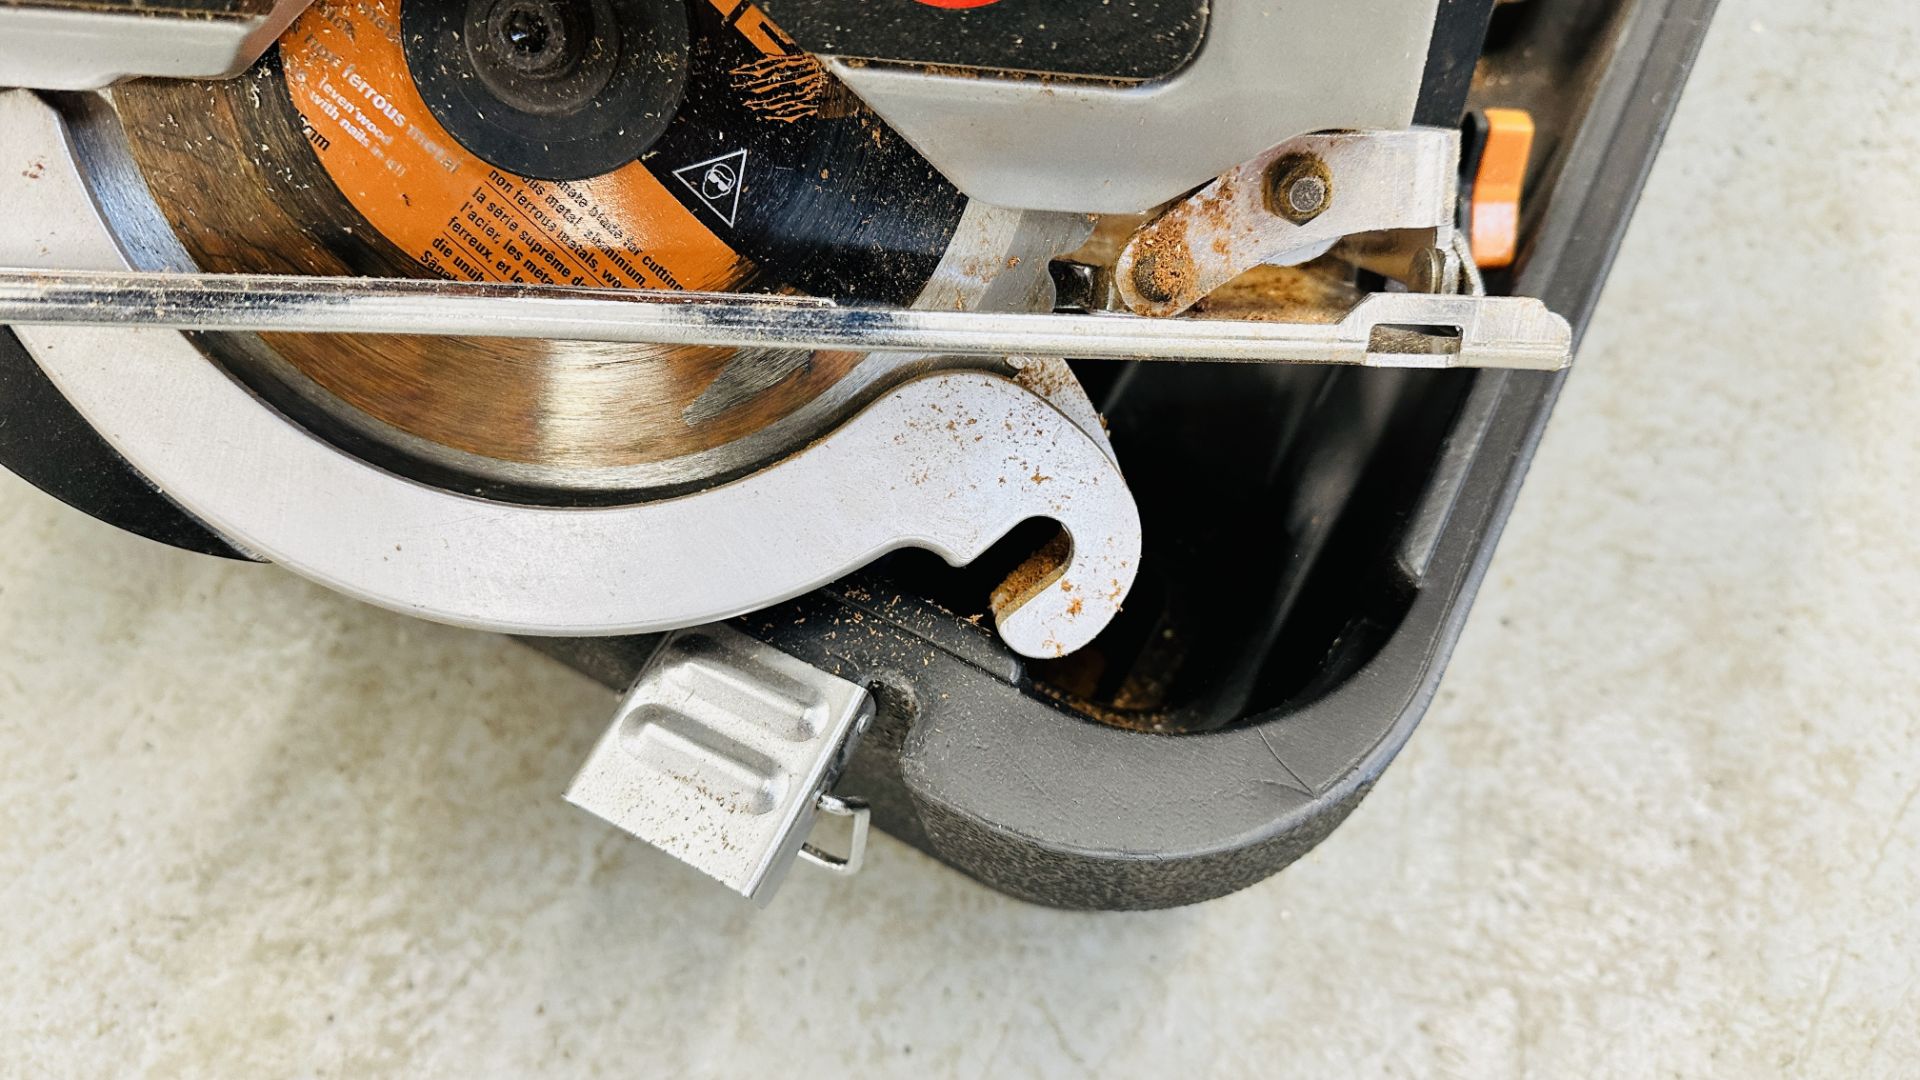 CASED EVOLUTION RAGE CIRCULAR SAW - SOLD AS SEEN. - Image 4 of 6